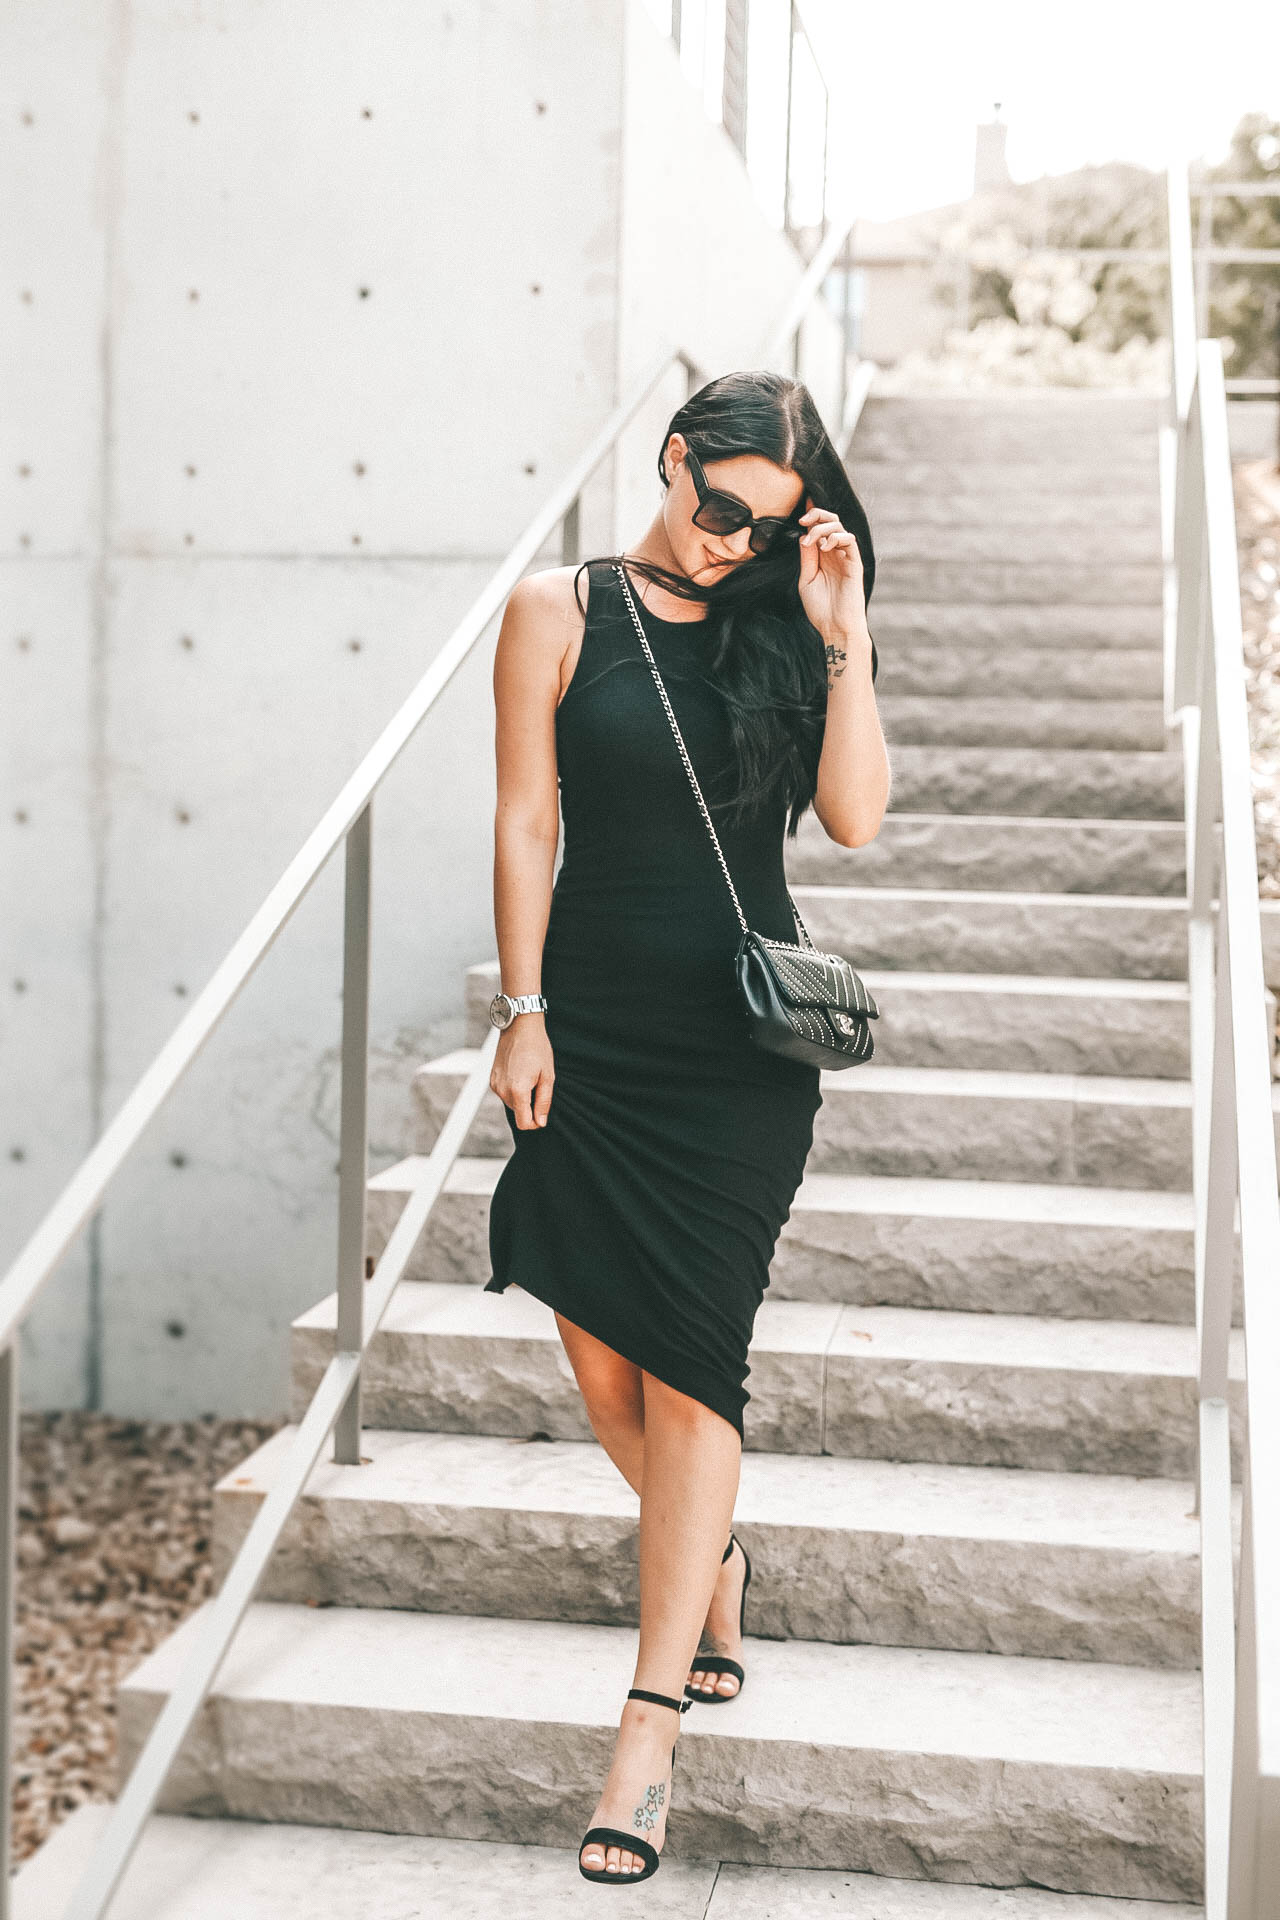 DTKAustin talks about one of her favorite new retailers at the Domain NORTHside. Marine Layer just opened and is offering a 20% discount with code DOMAINNORTHSIDE. | little black dress style | how to style a black dress | summer dresses || Dressed to Kill #fashion #style #outfits #lbd #blackdress #dresses #dtkaustin - {Marine Layer at Domain NORTHside + 20% off Discount} featured by popular Austin fashion blogger Dressed to Kill